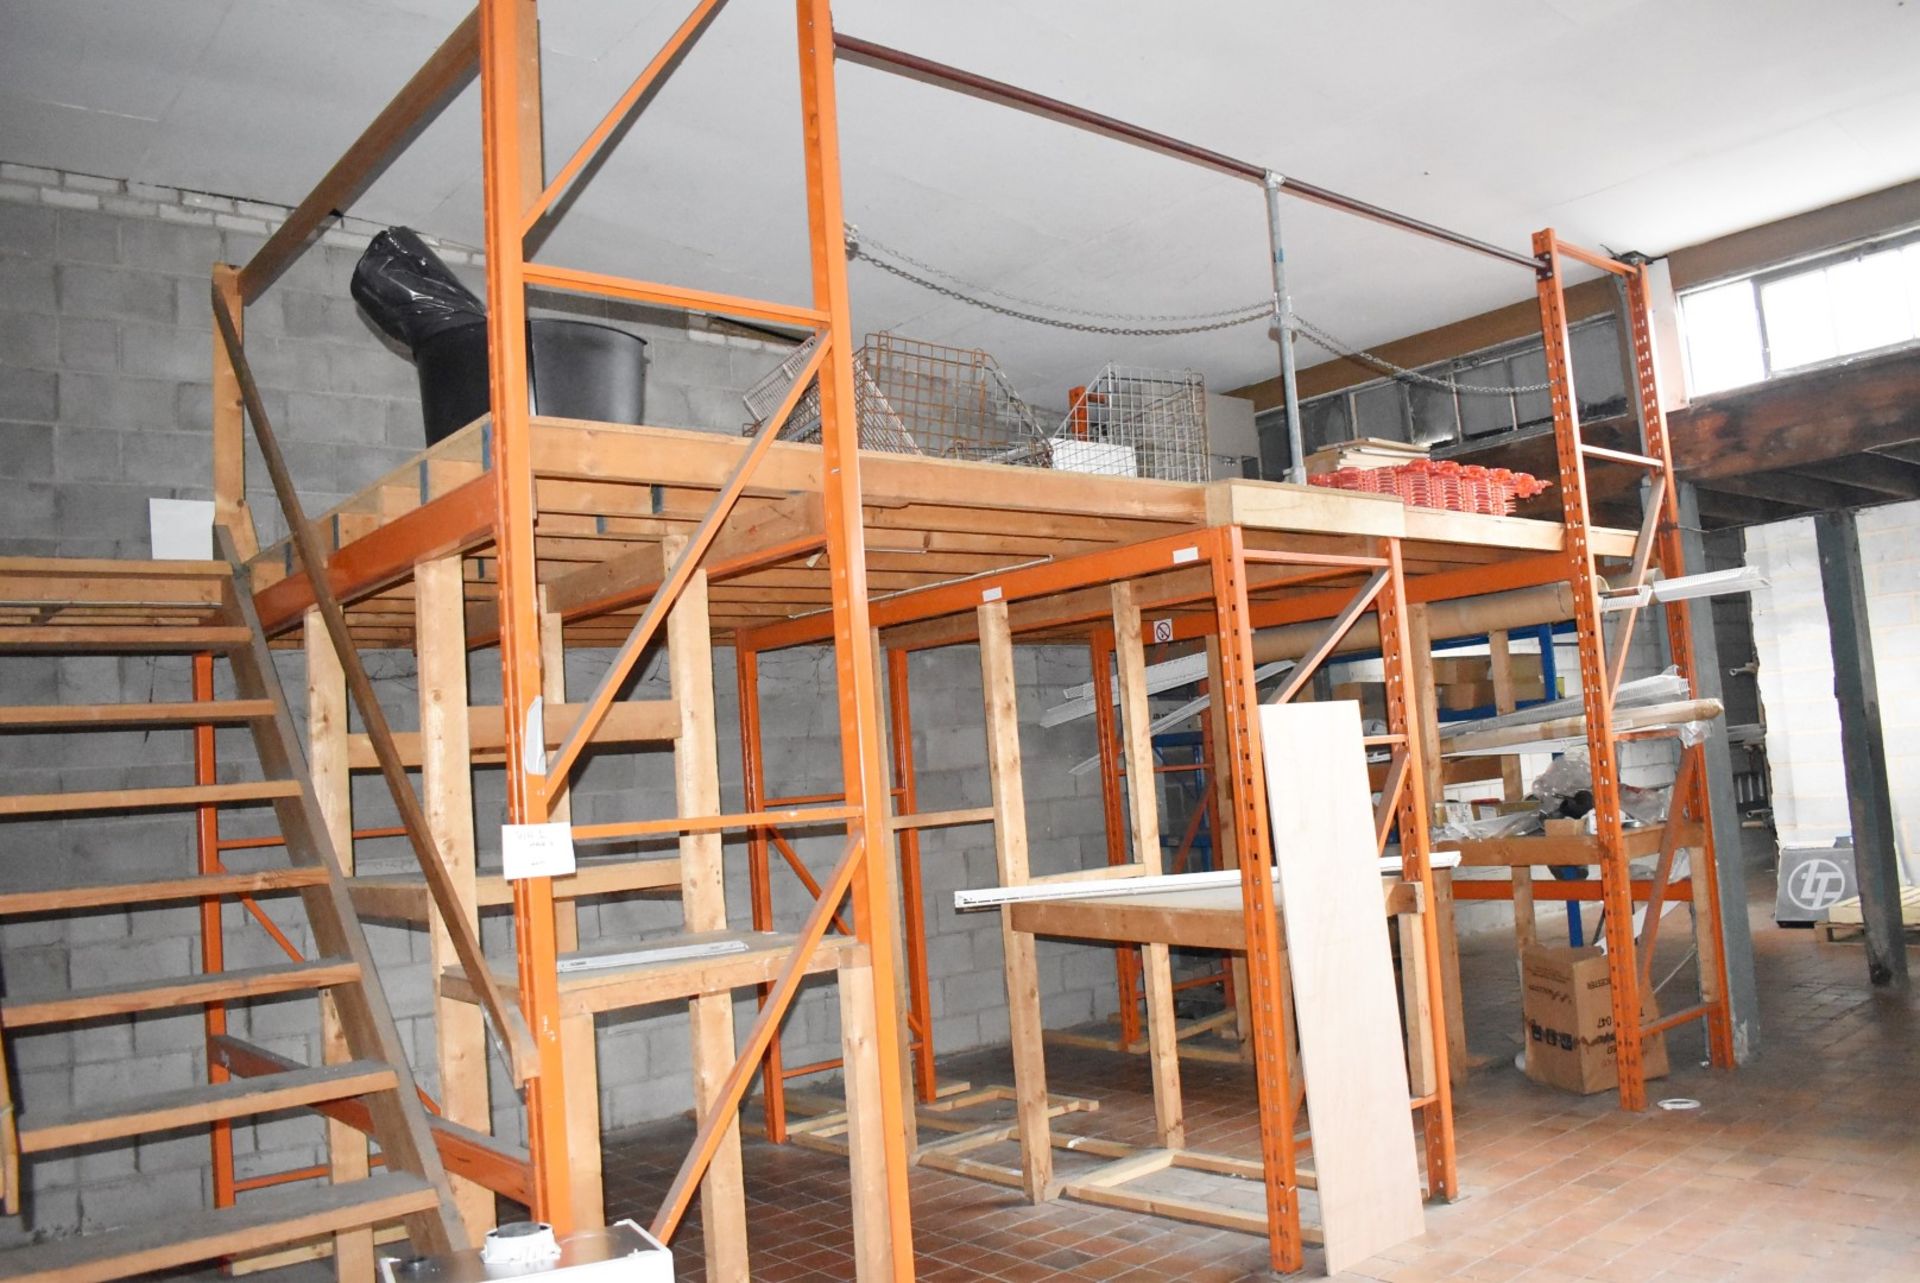 1 x Mezzanine Floor Construction of Steel Racking and Timber - Includes Staircase - Size: W11m x D3m - Image 6 of 18